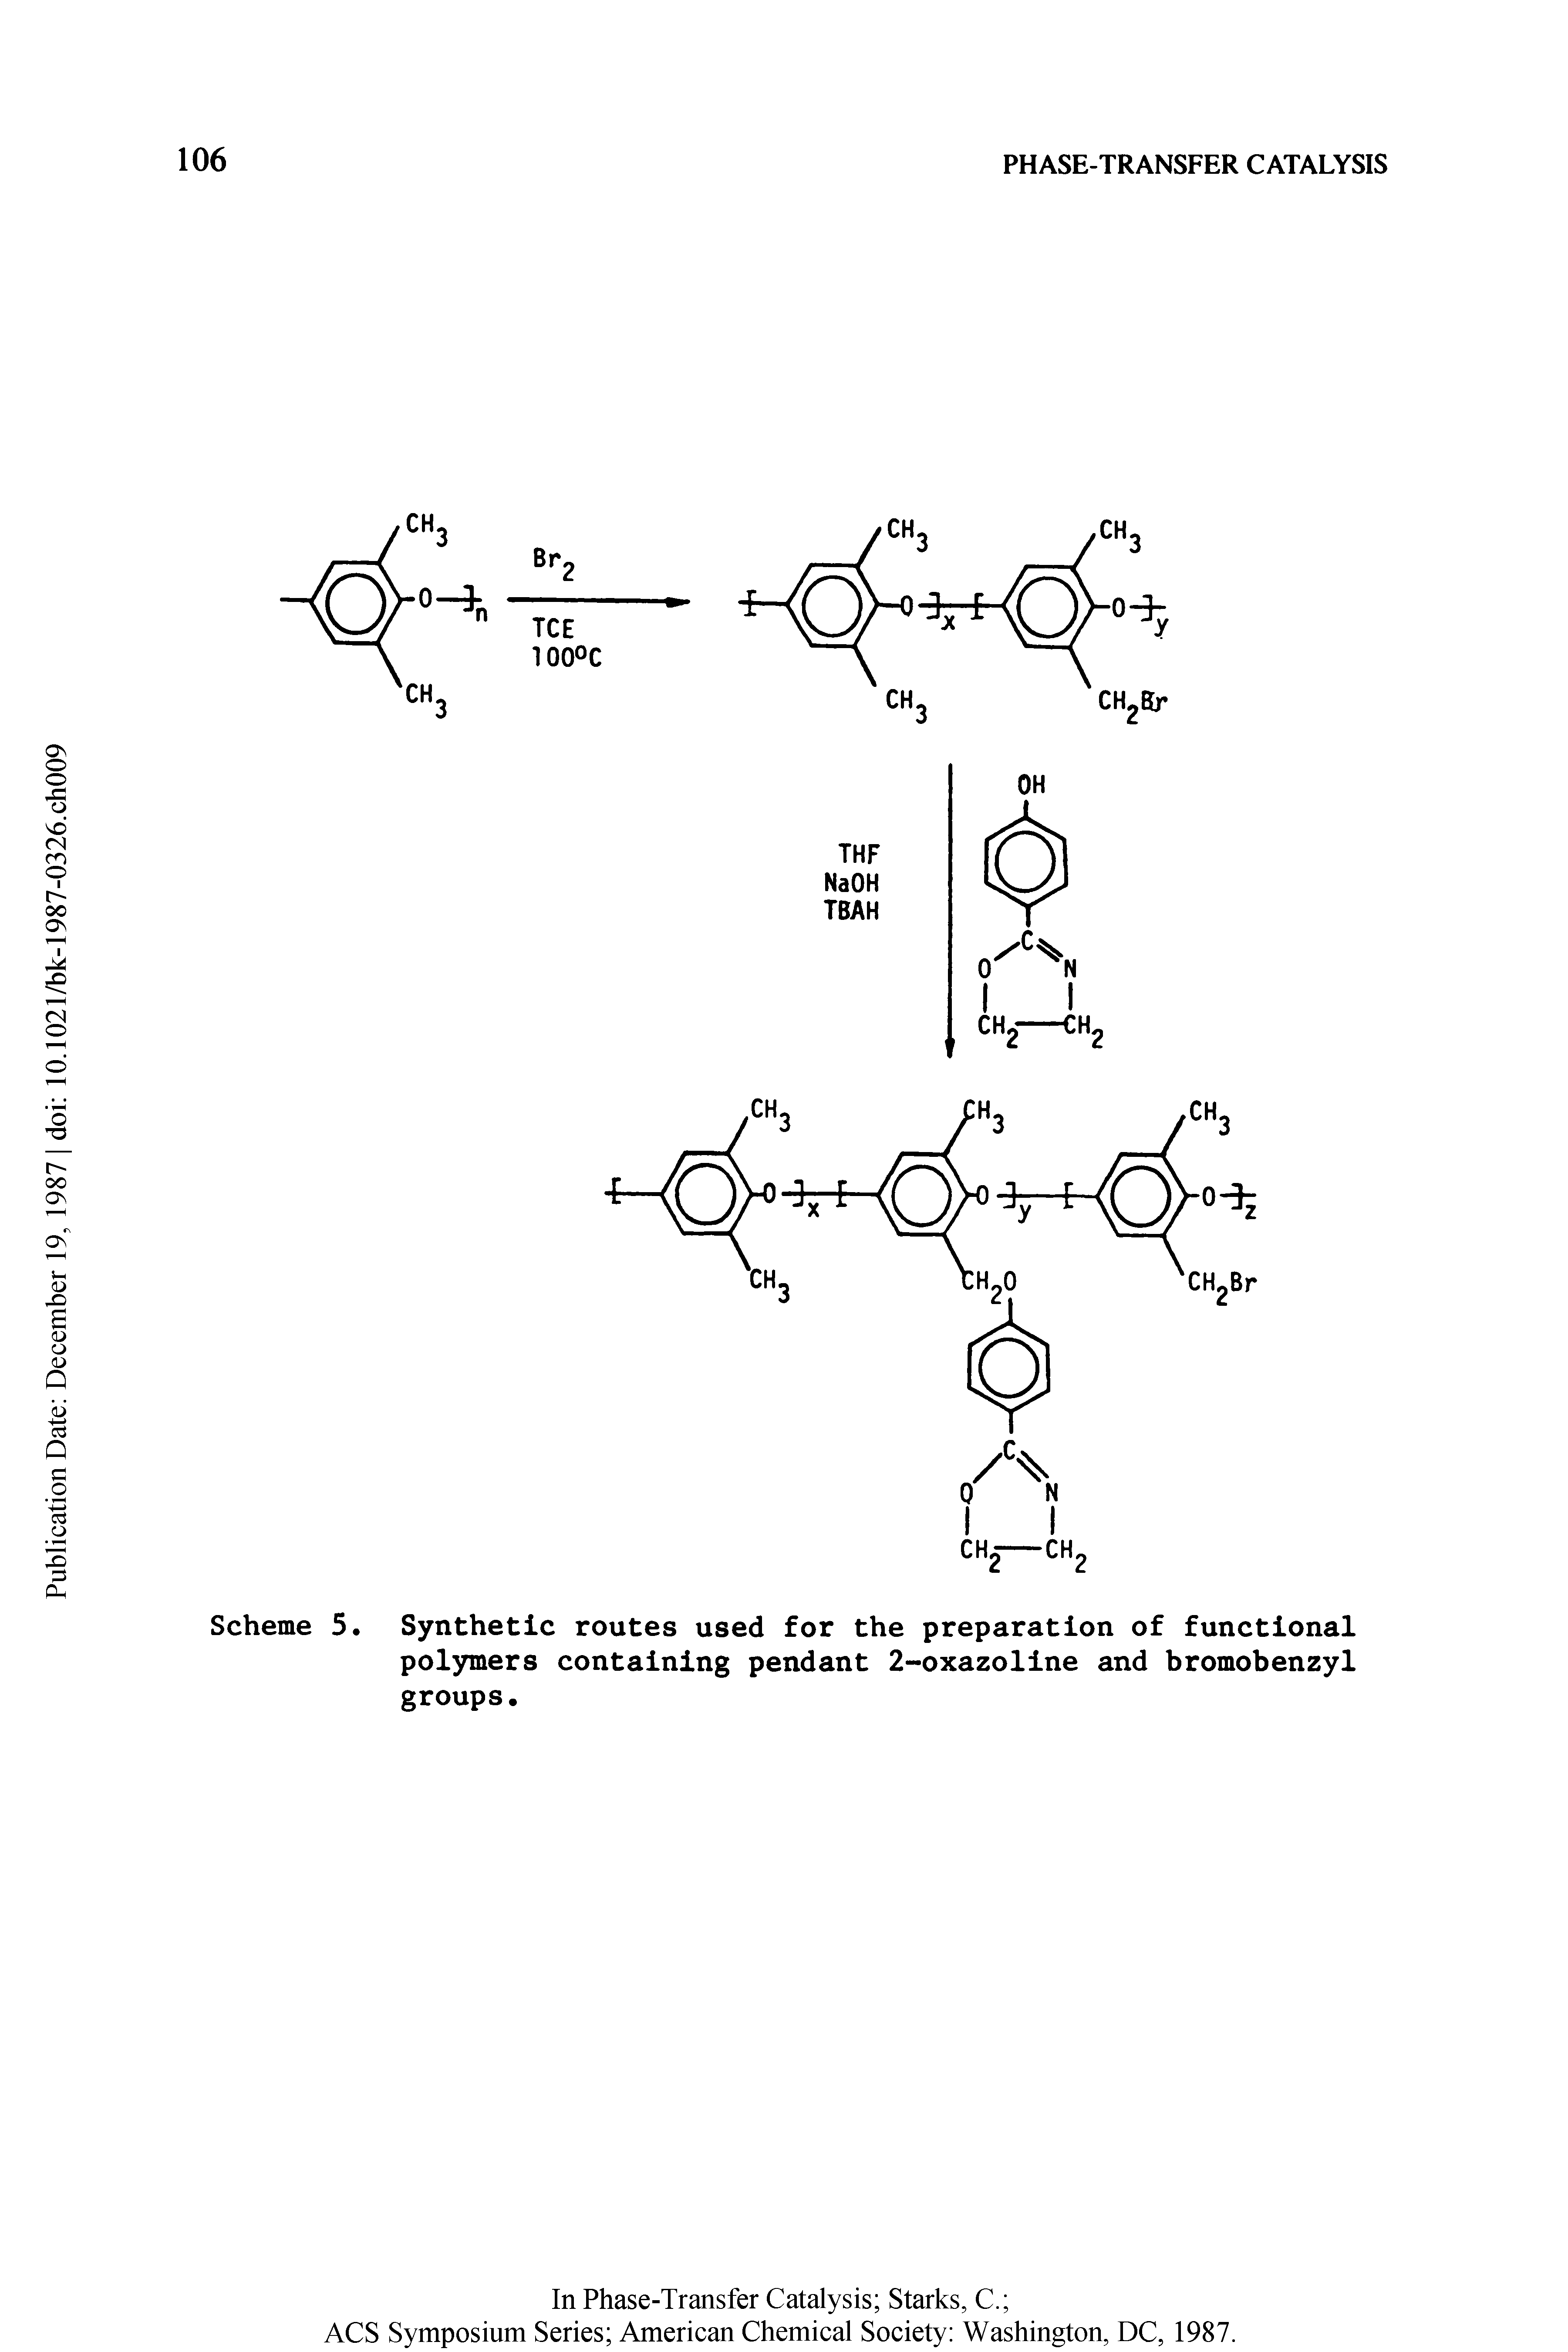 Scheme 5. Synthetic routes used for the preparation of functional polymers containing pendant 2-oxazoline and bromobenzyl groups.